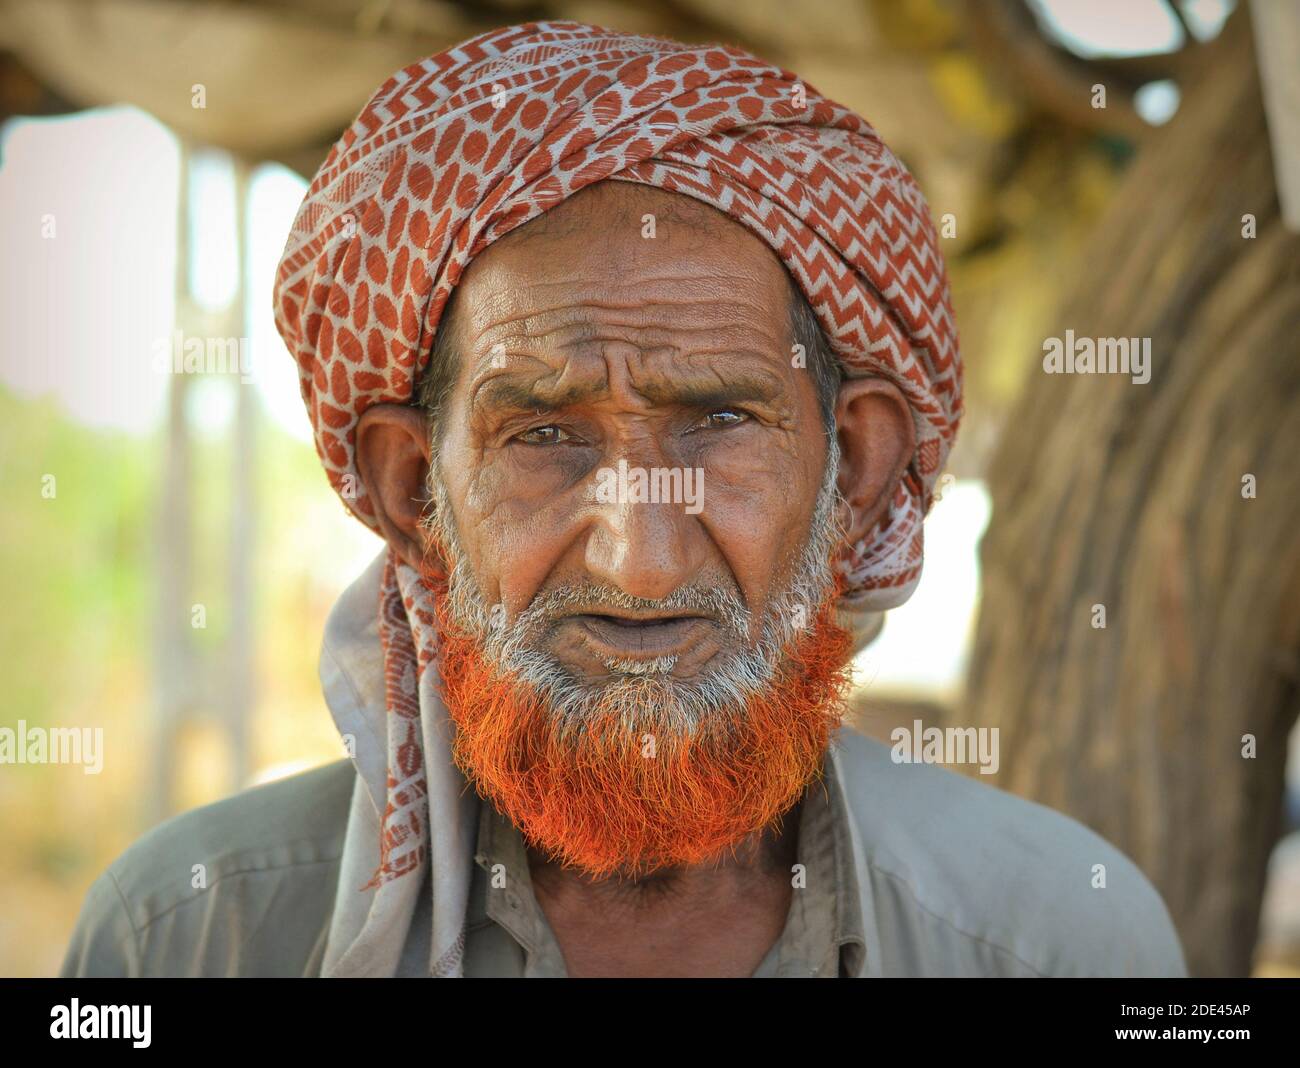 Turbaned old Indian Muslim man with forehead wrinkles, lived-in face and henna-dyed orange Muslim beard poses on the roadside for the camera. Stock Photo